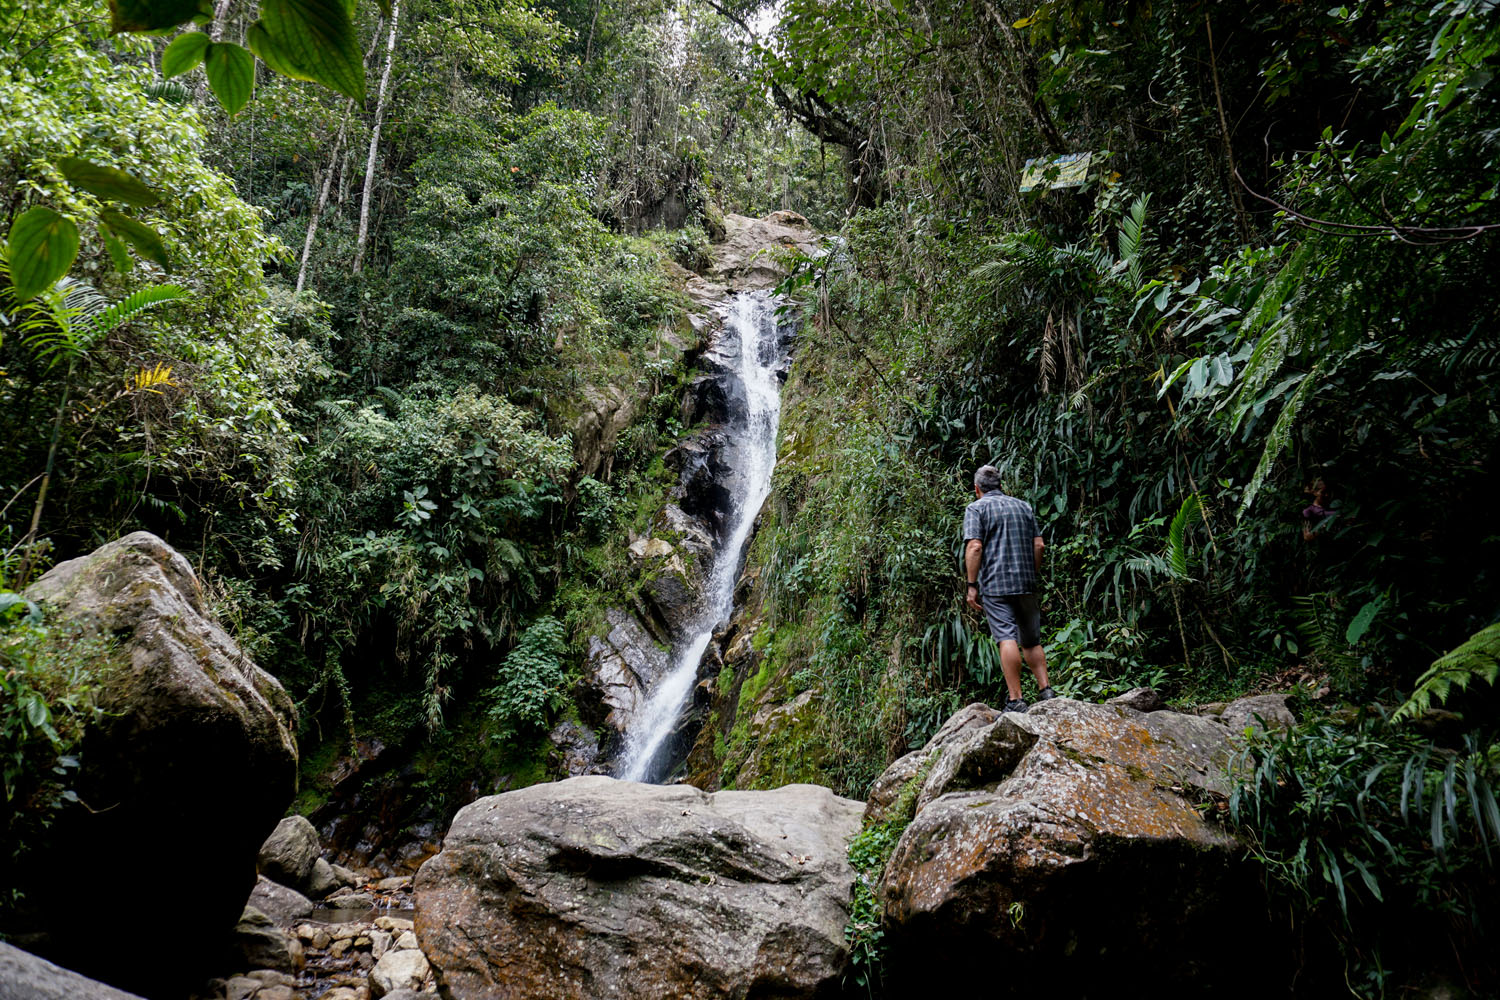 The first waterfall on our hike outside Medellín.